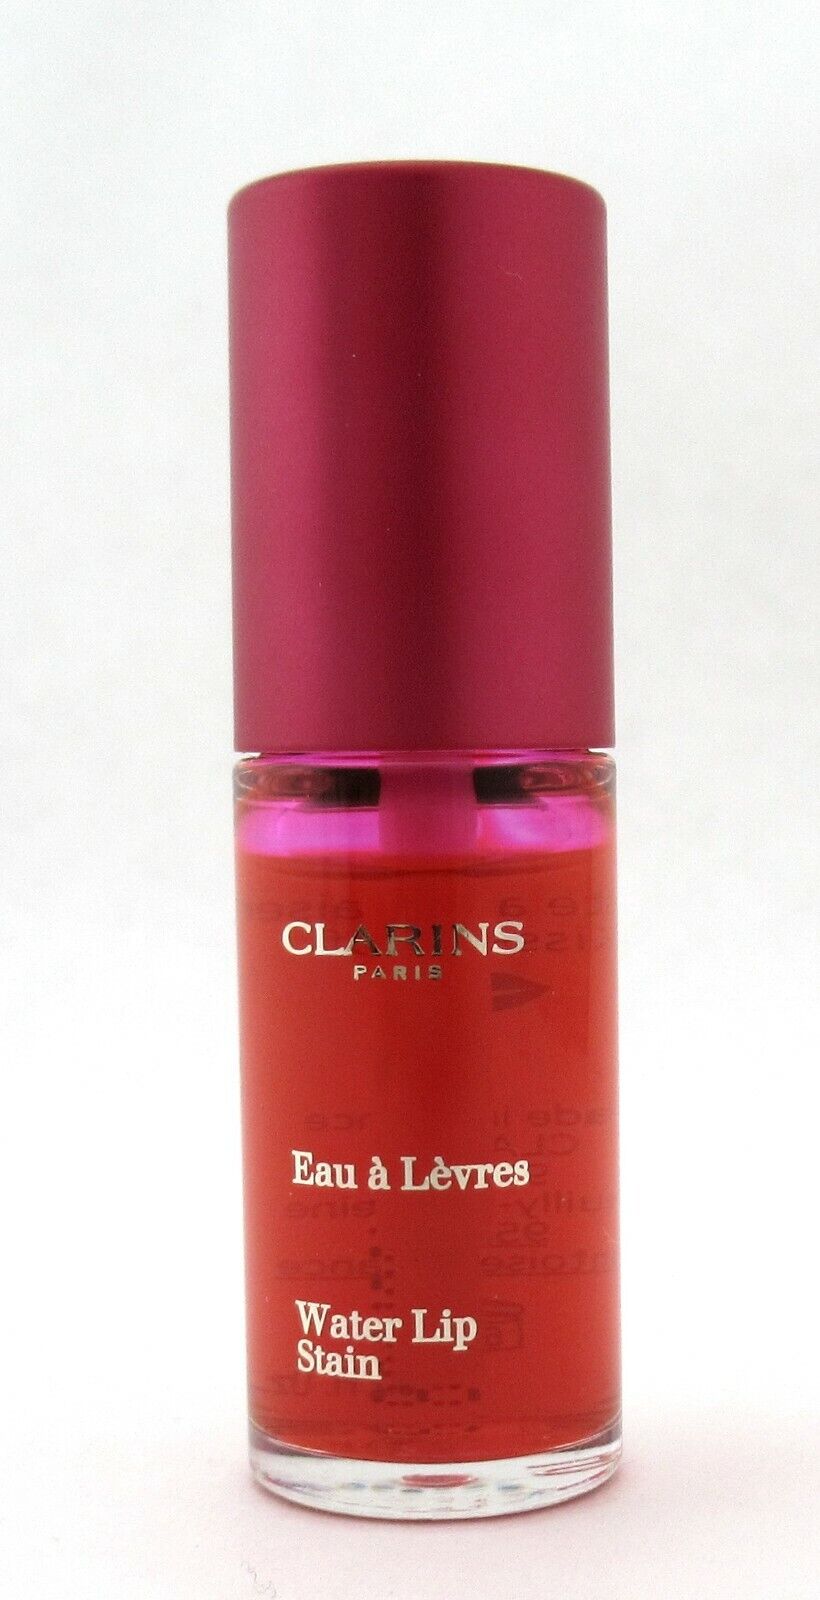 Clarins Water Lip Stain 01 ROSE WATER 7 ml./ 0.2 fl oz. New Tester